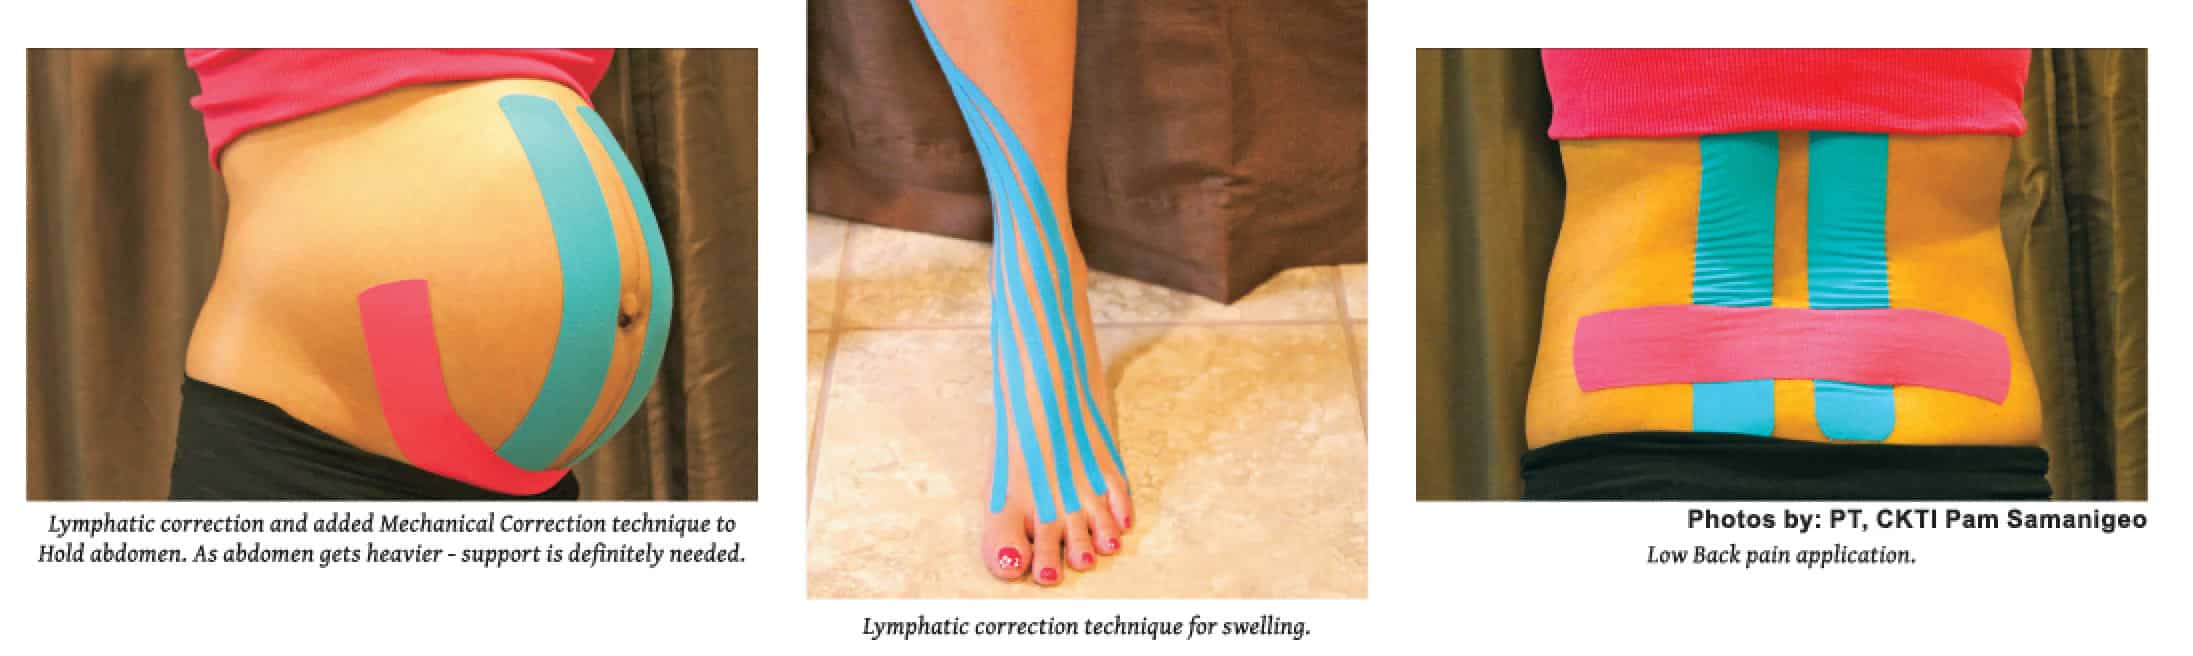 Kinesiotaping for Pregnancy! How KT tape can Help with Rib Pain